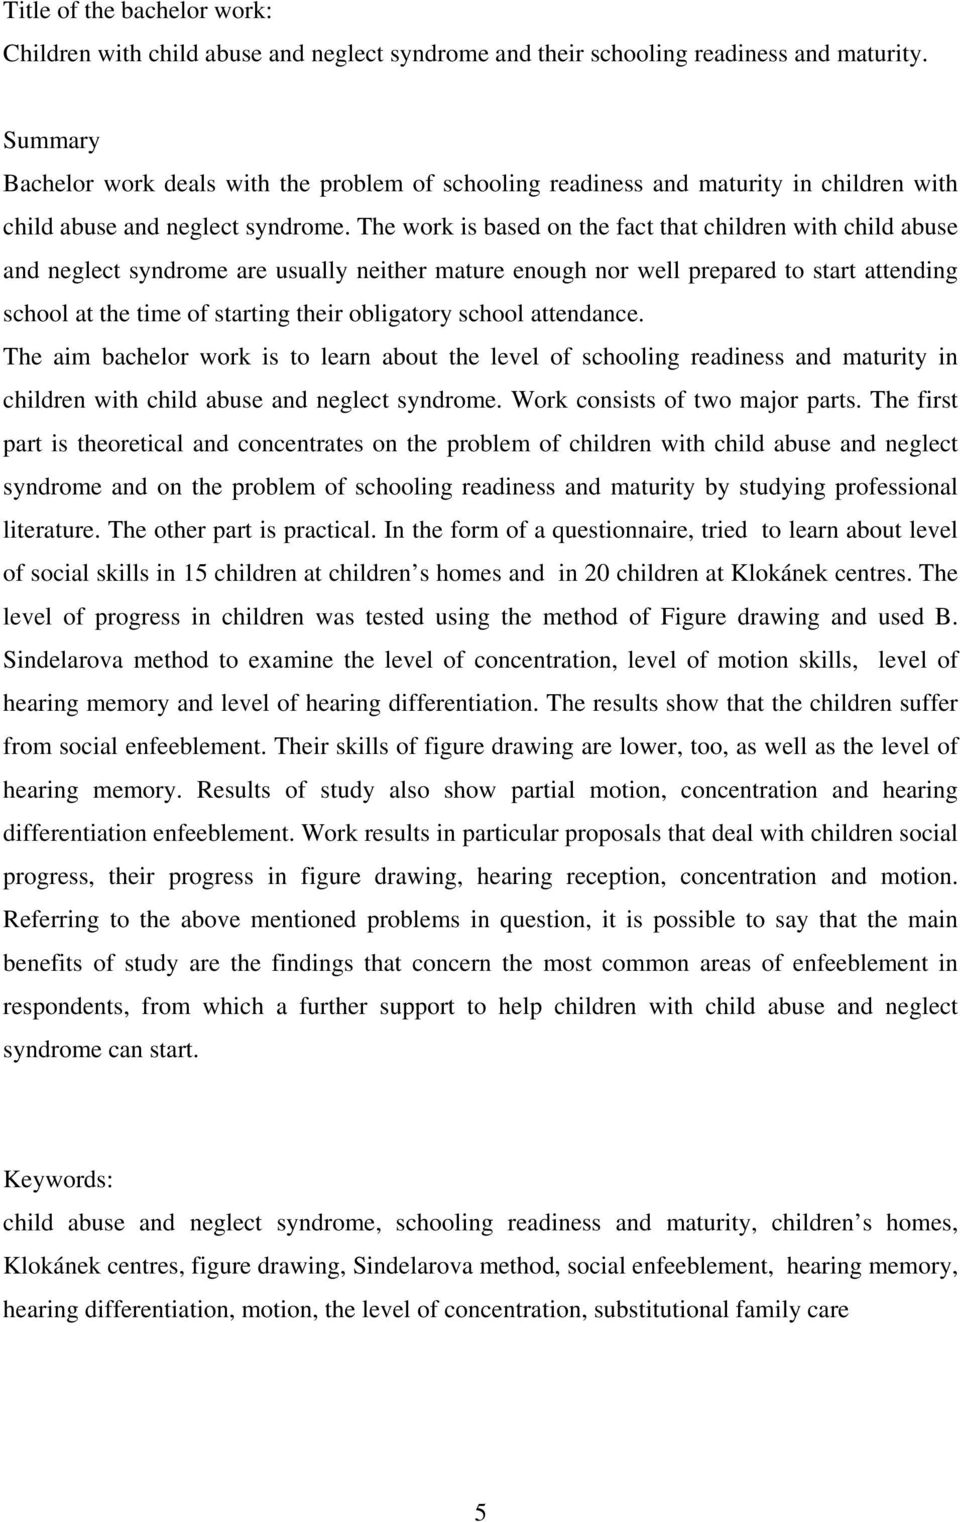 The work is based on the fact that children with child abuse and neglect syndrome are usually neither mature enough nor well prepared to start attending school at the time of starting their